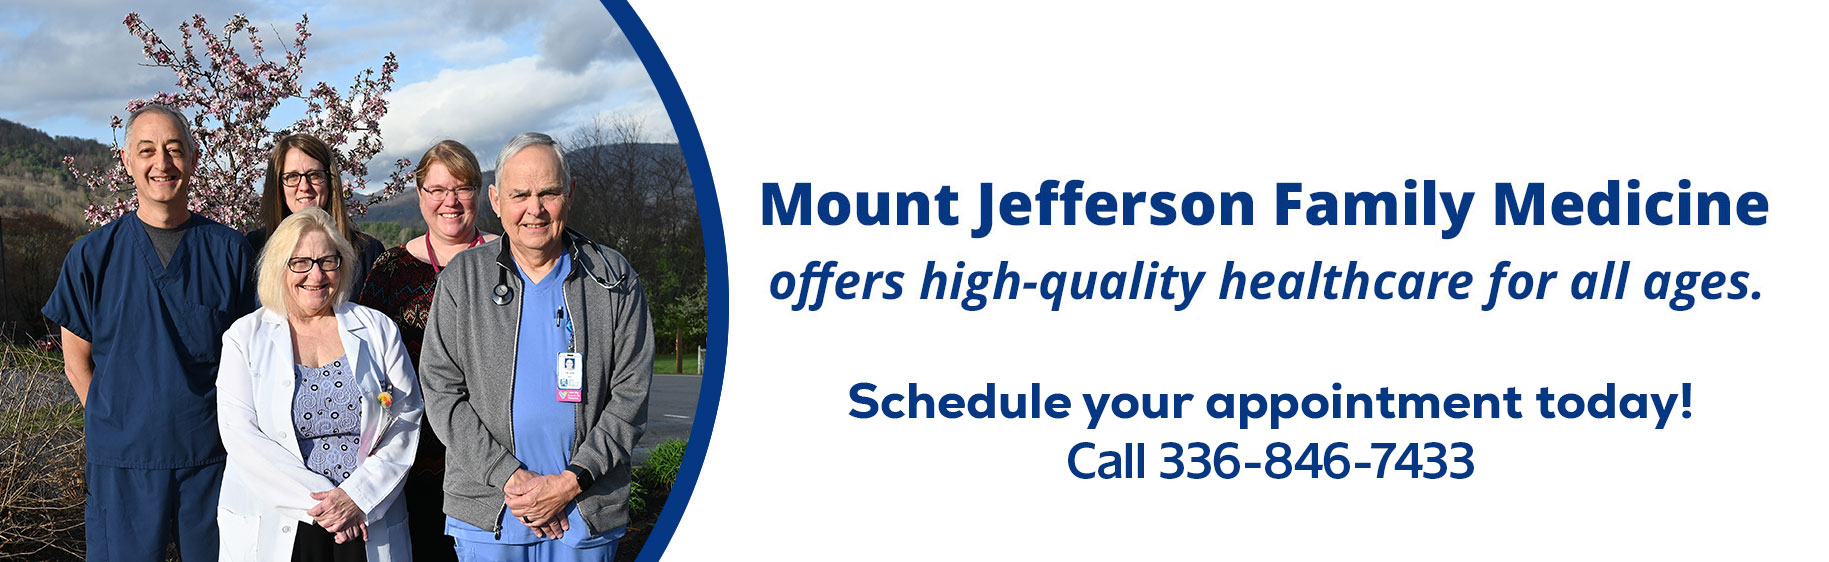 Banner picture of our Professional Staff from Mount Jefferson Family Medicine. 

Banner says:
Mount Jefferson Family Medicine offers quality healthcare for all ages, ranging from obstetrical and infant care to adult family medicine. 
Click here to learn more about our services or call 336-846-7433 to schedule an appointment.